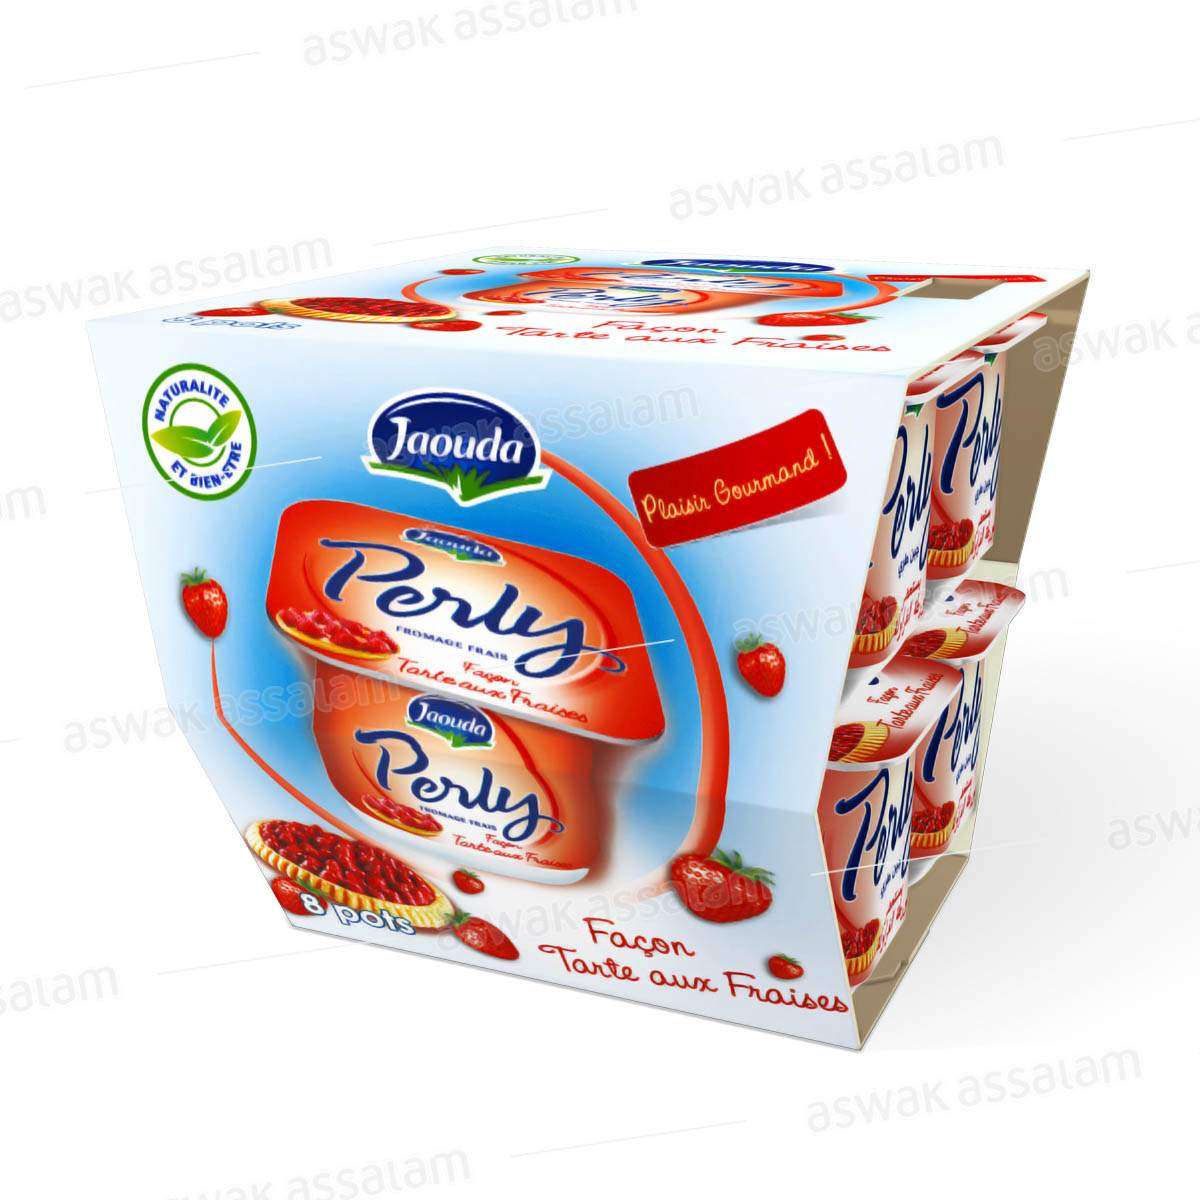 FROMAGE PERLY TARTE FRAISES 8*85G PACK JAOUDA